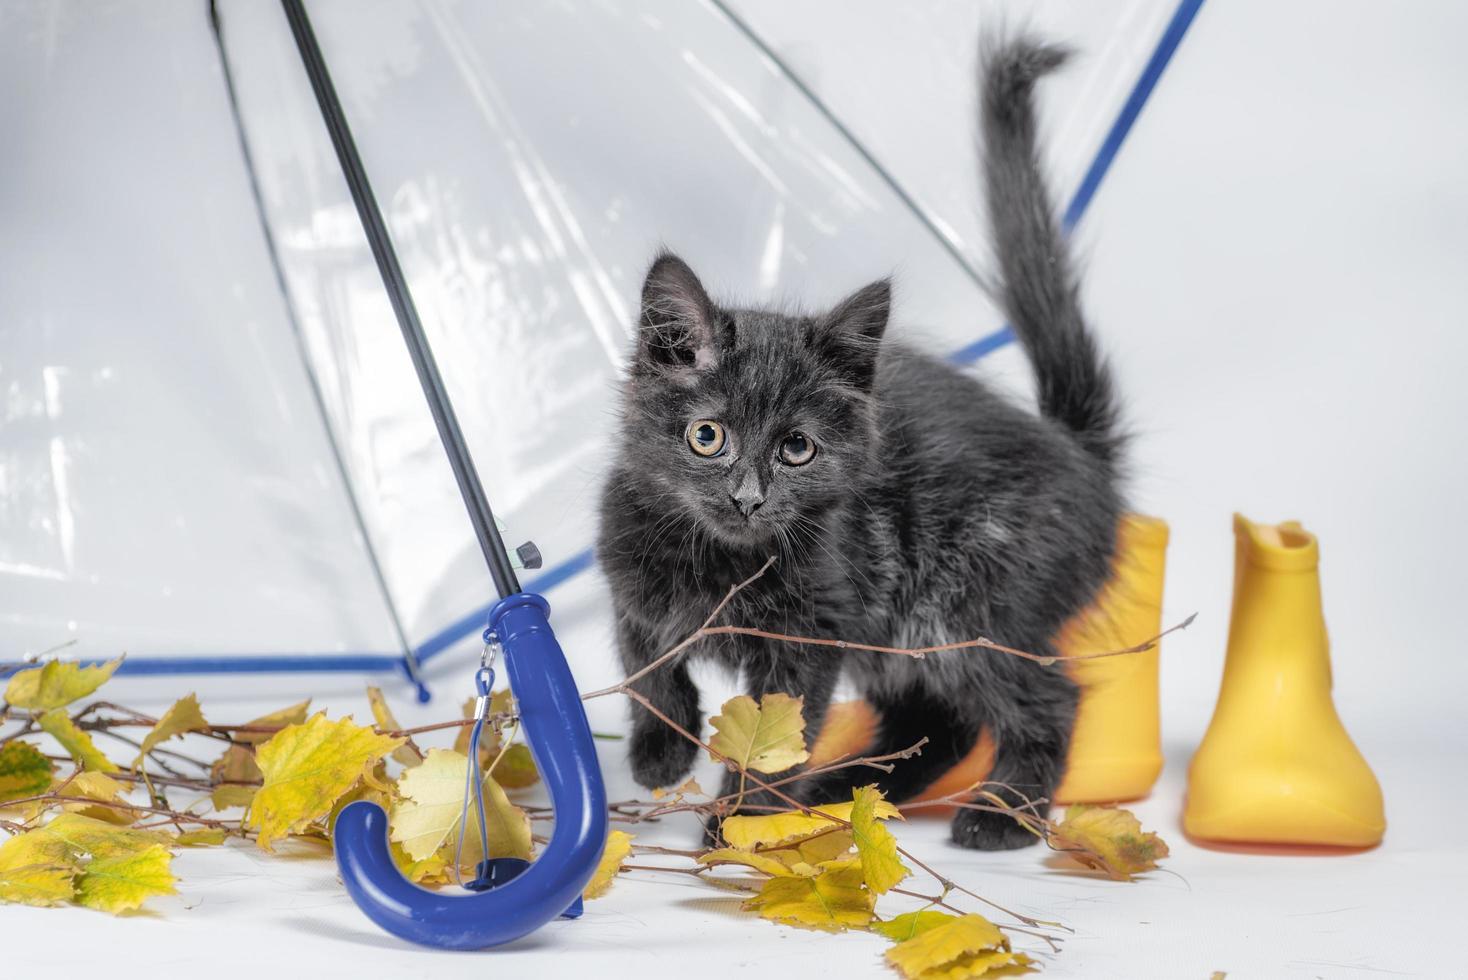 black fluffy kitten with autumn leaves and yellow rubber boots under a transparent umbrella with a blue handle photo